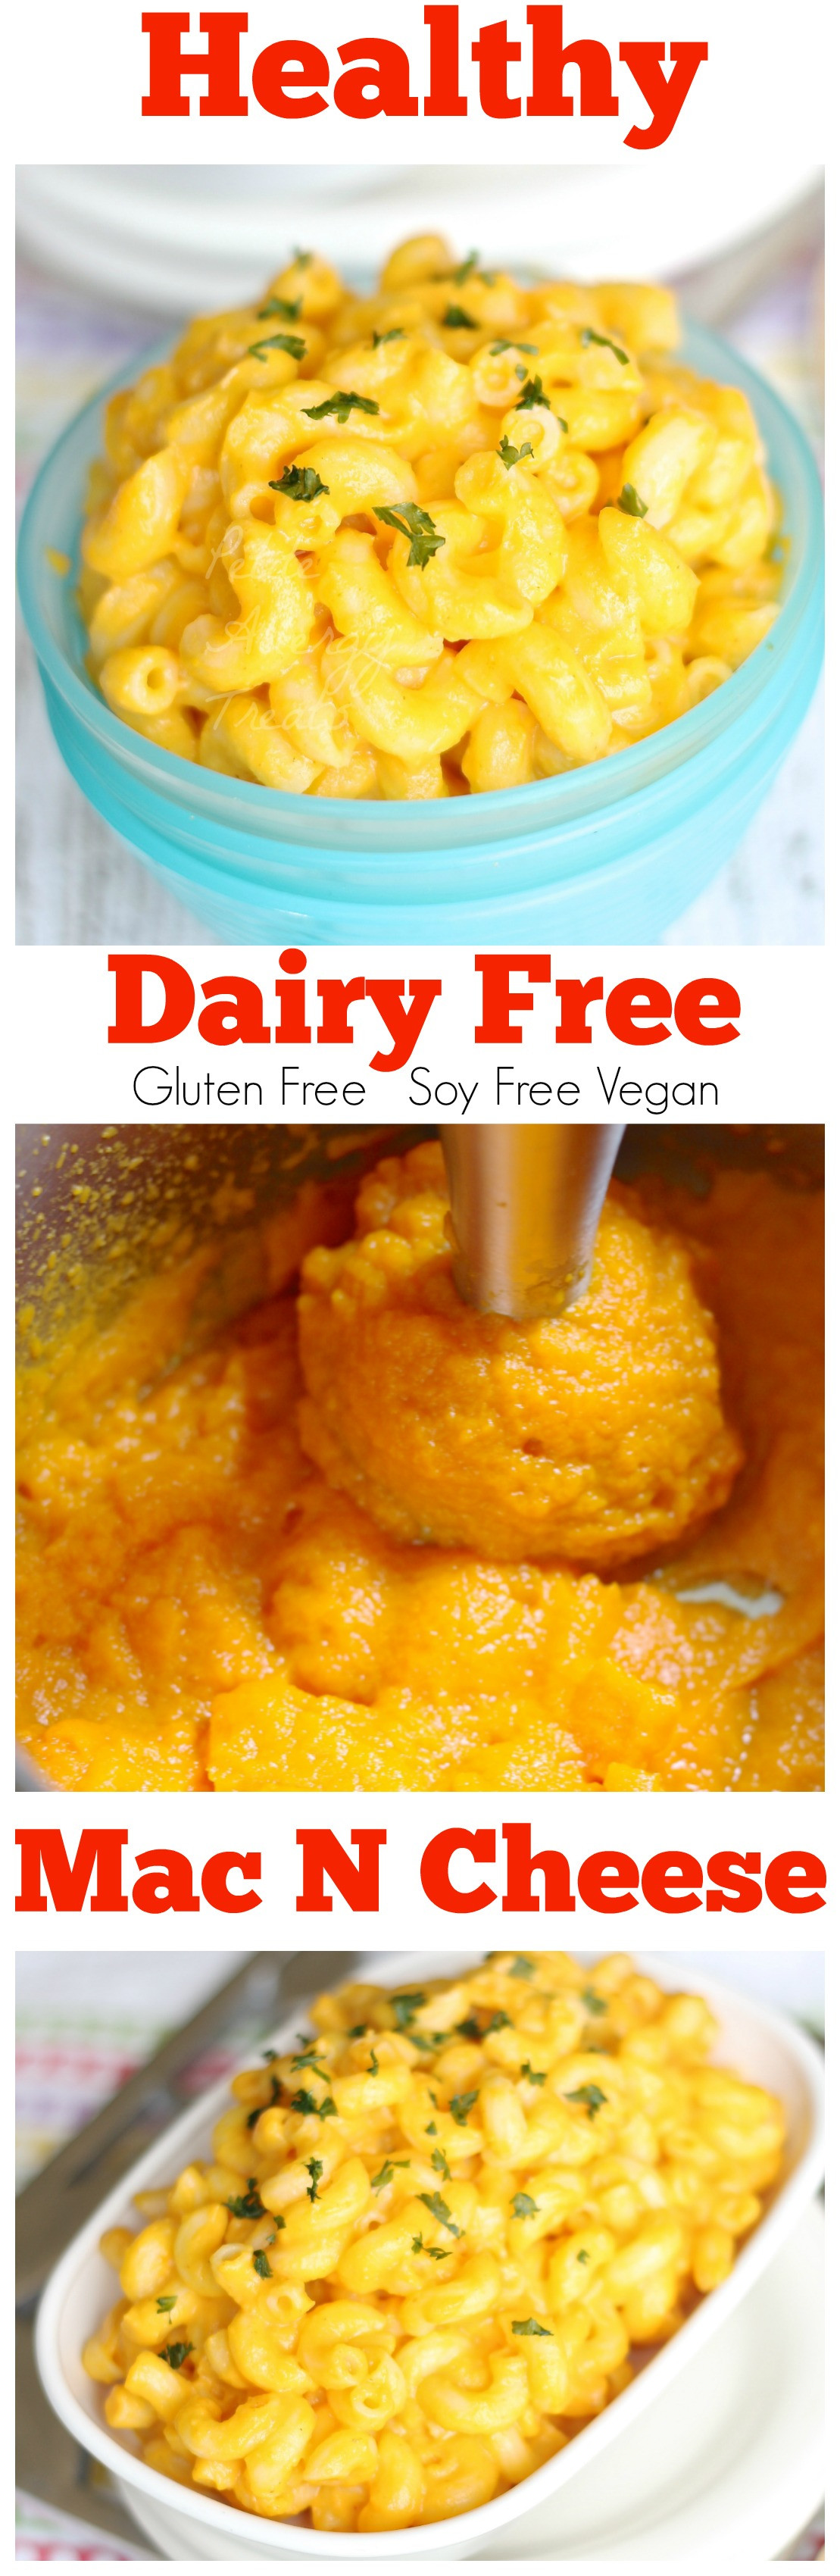 Dairy Free Soy Free Recipes
 Dairy Free Mac and Cheese Gluten Free Vegan Petite